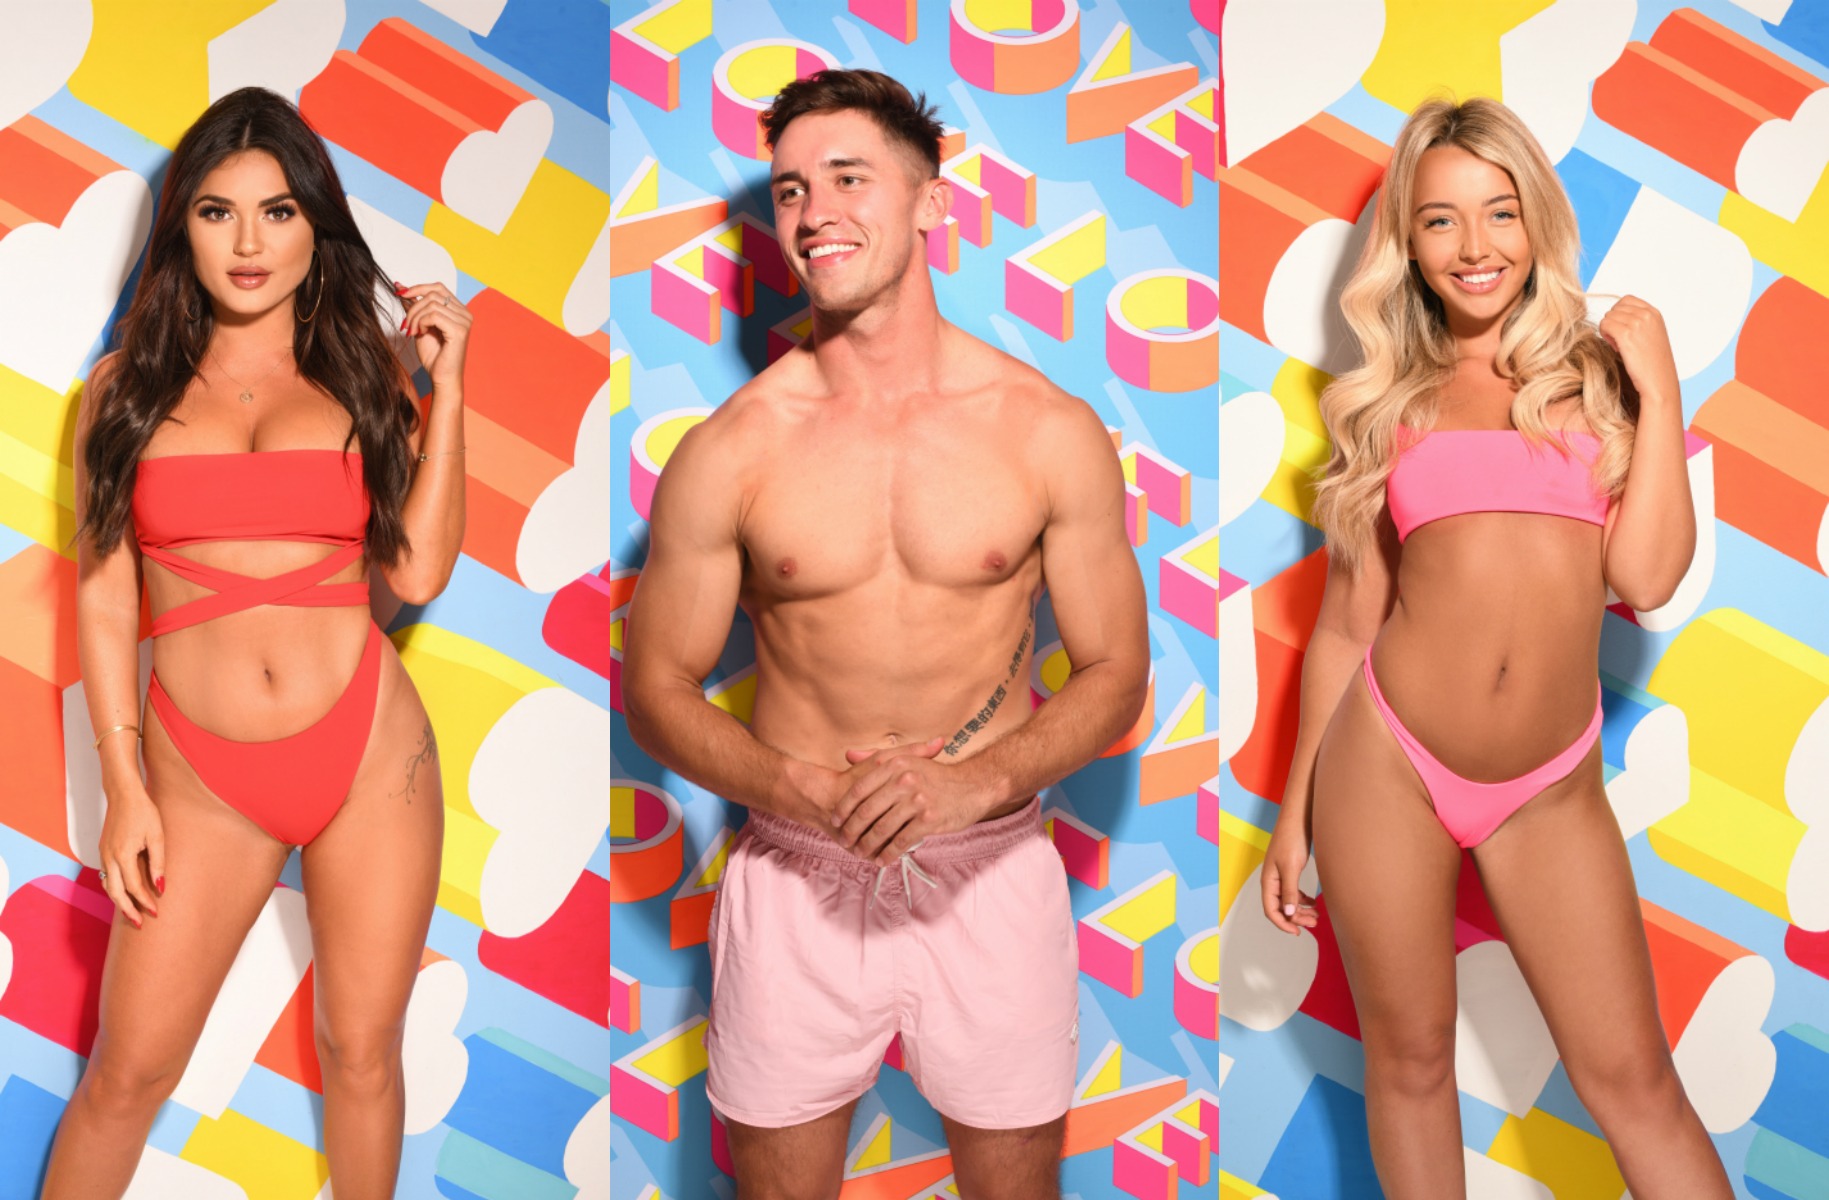 Love Island The new islanders go dating and here is who they choose